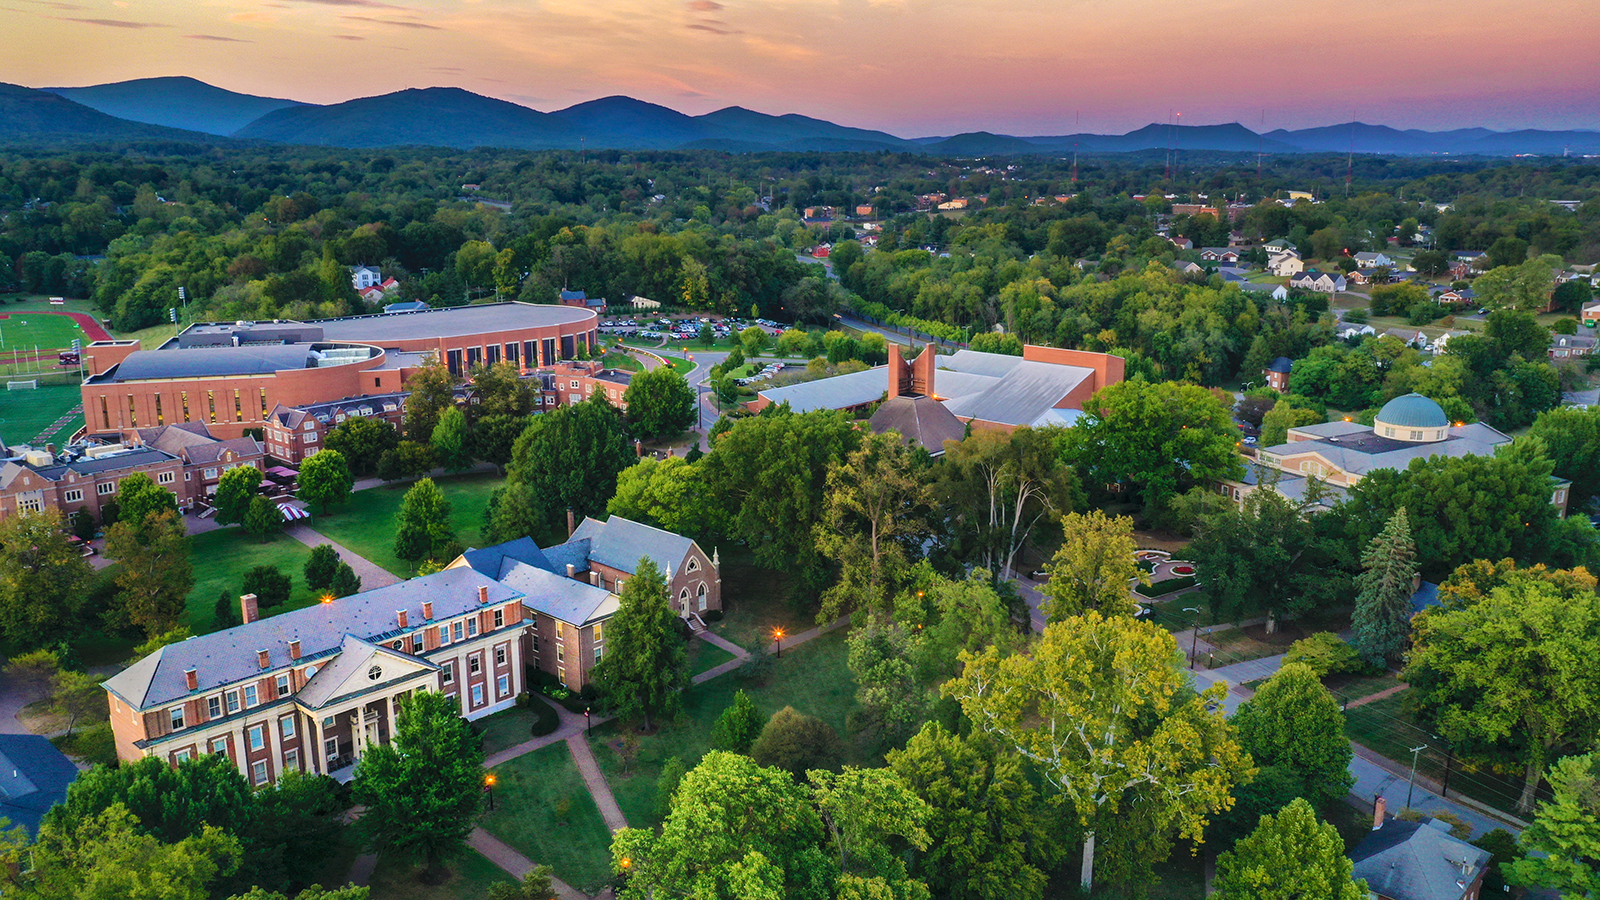 Roanoke College from above at sunset